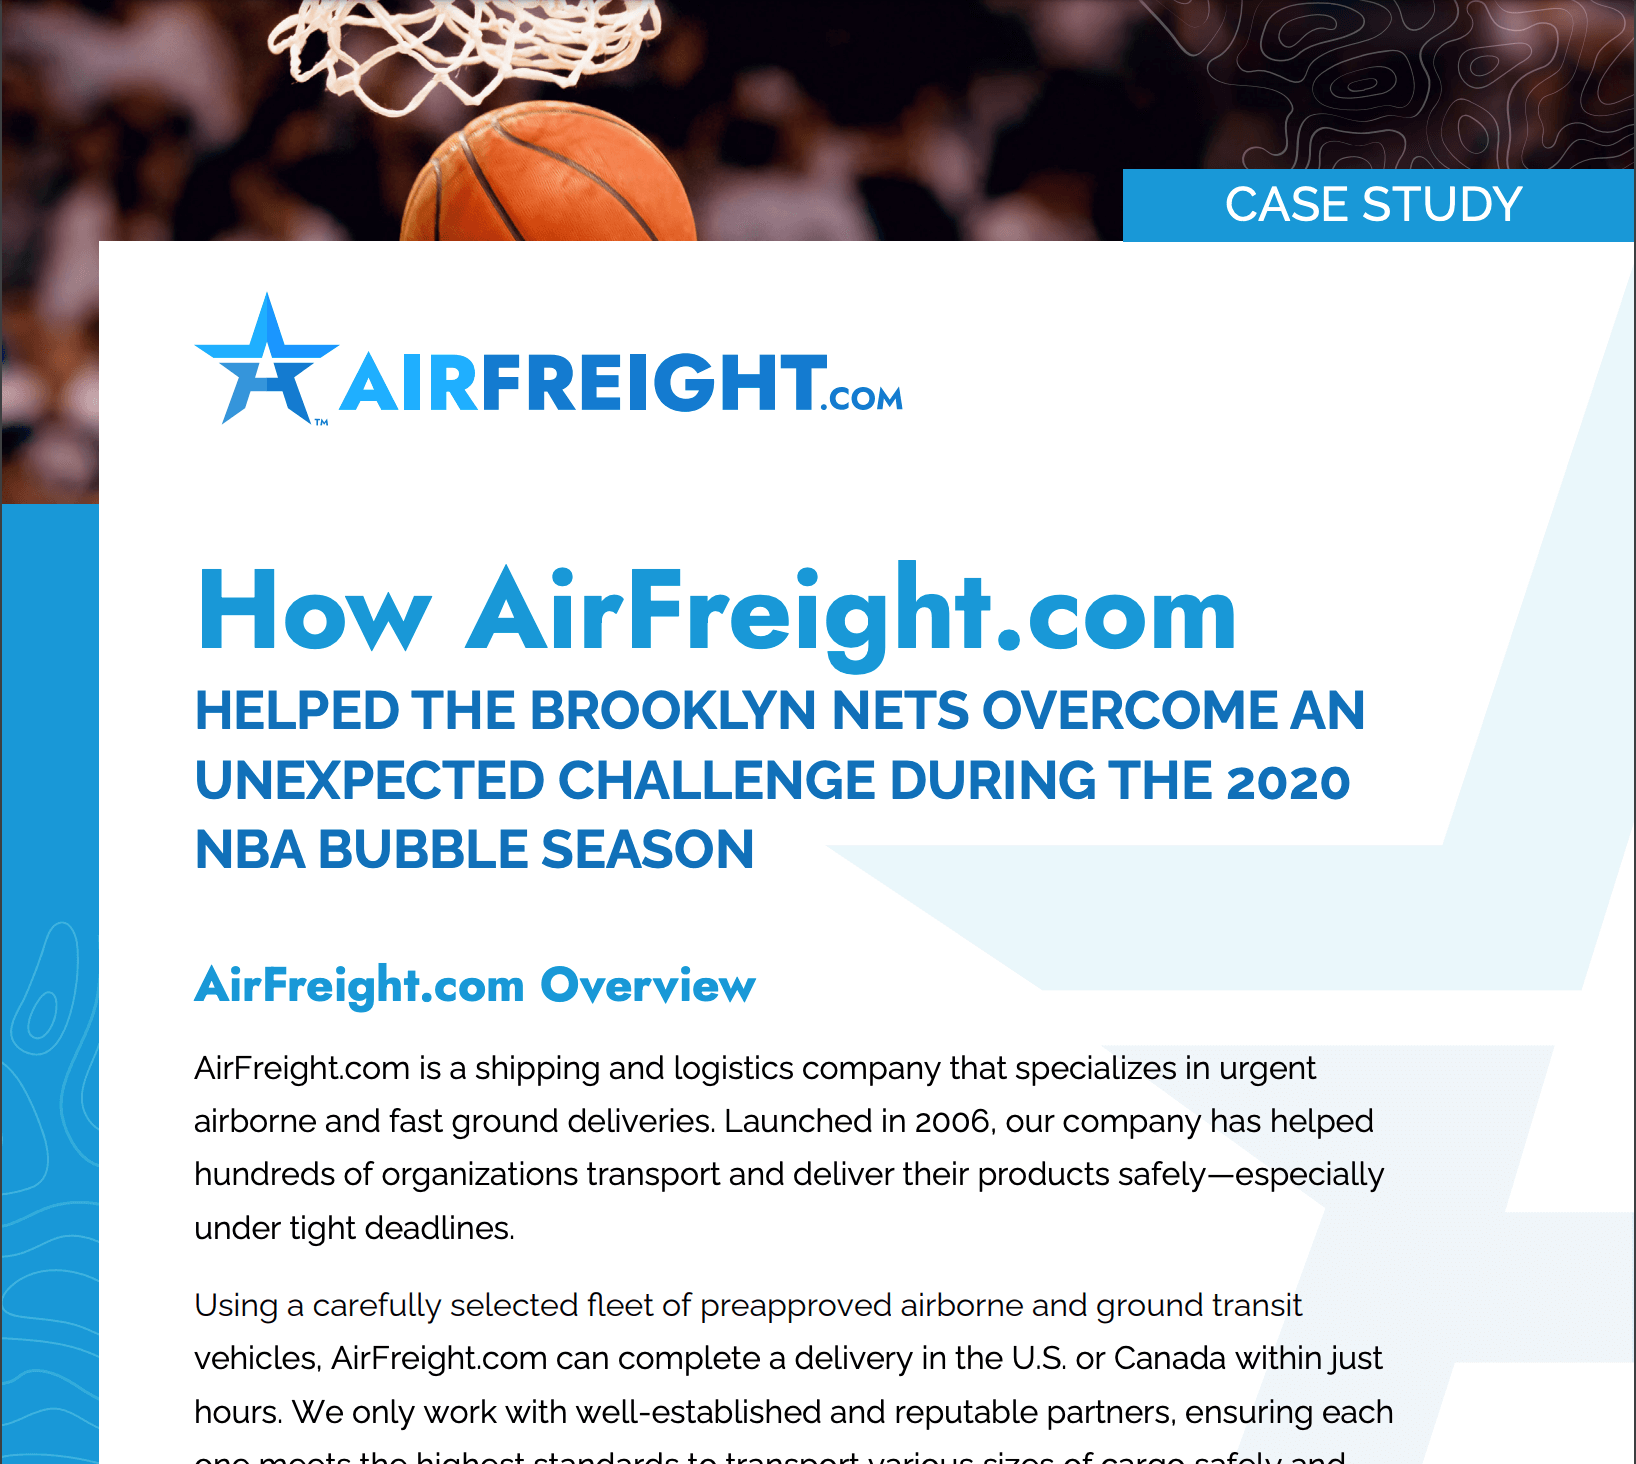 How AirFreight.com Helped the Brooklyn Nets